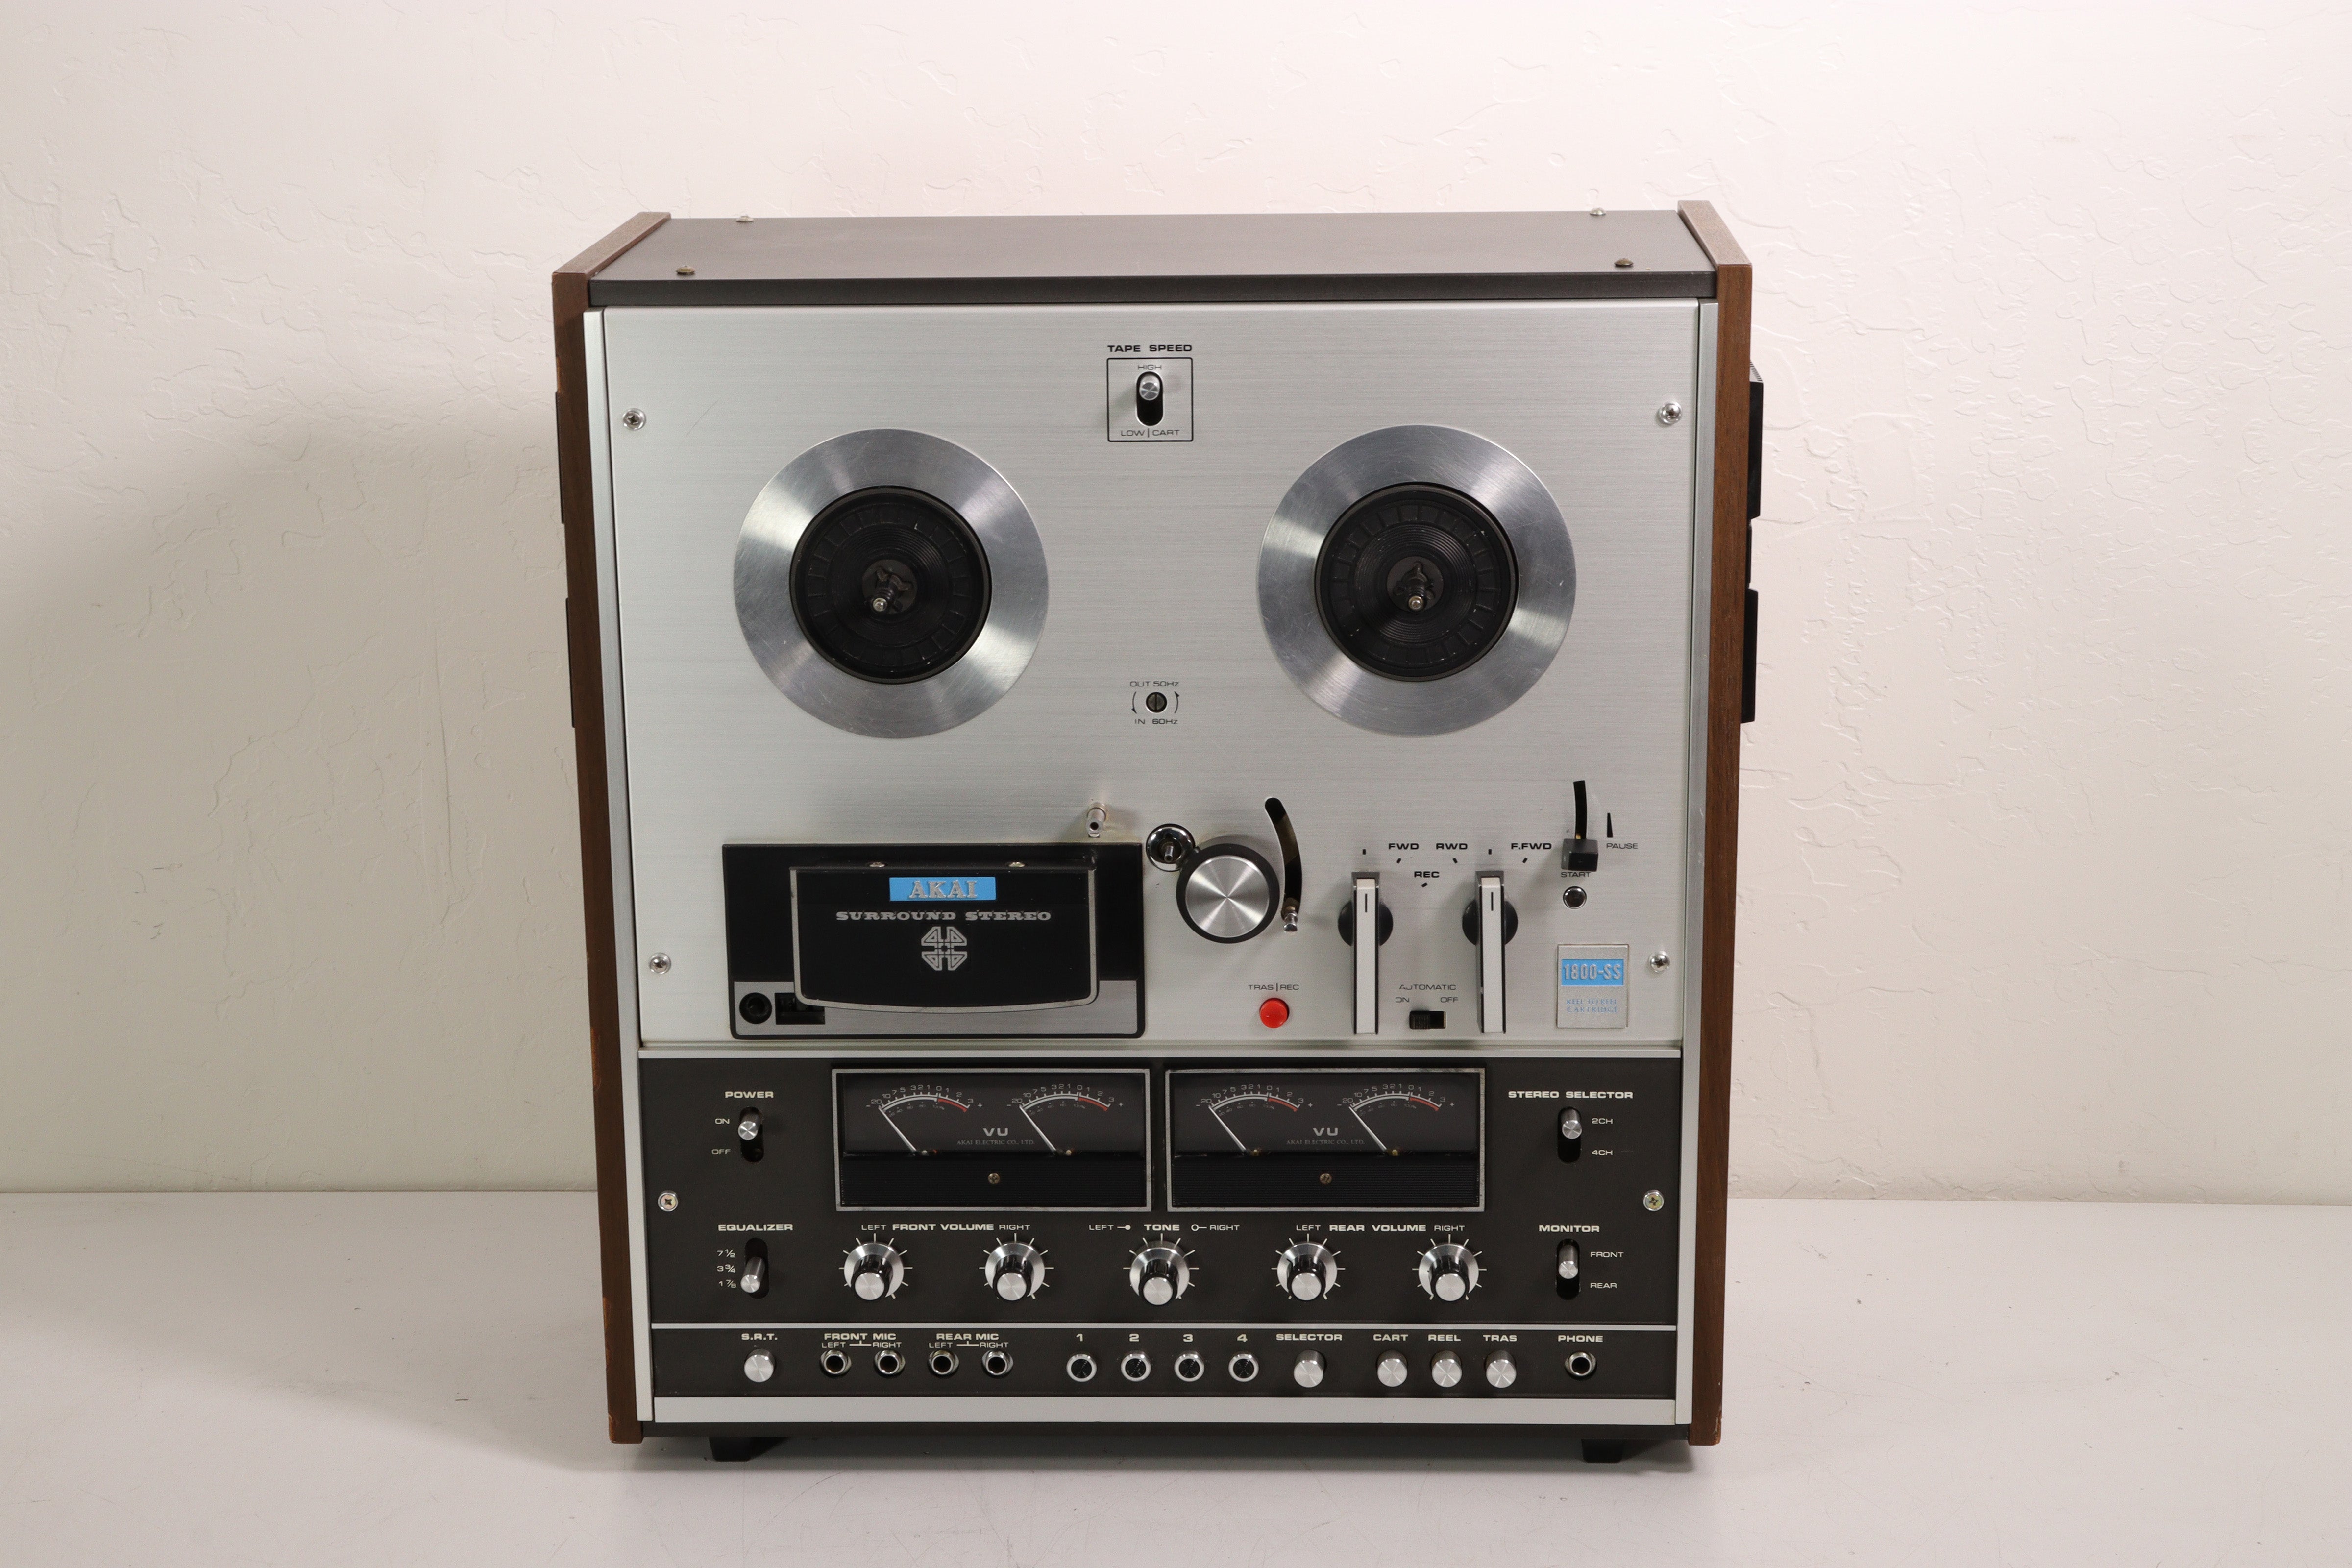 http://spencertified.com/cdn/shop/products/Akai-1800-SS-Reel-To-Reel-8-Track-Cartridge-Player-4-Track-Surround-Stereo-Recording-Reel-to-Reel-Tape-Players-Recorders.jpg?v=1674766684